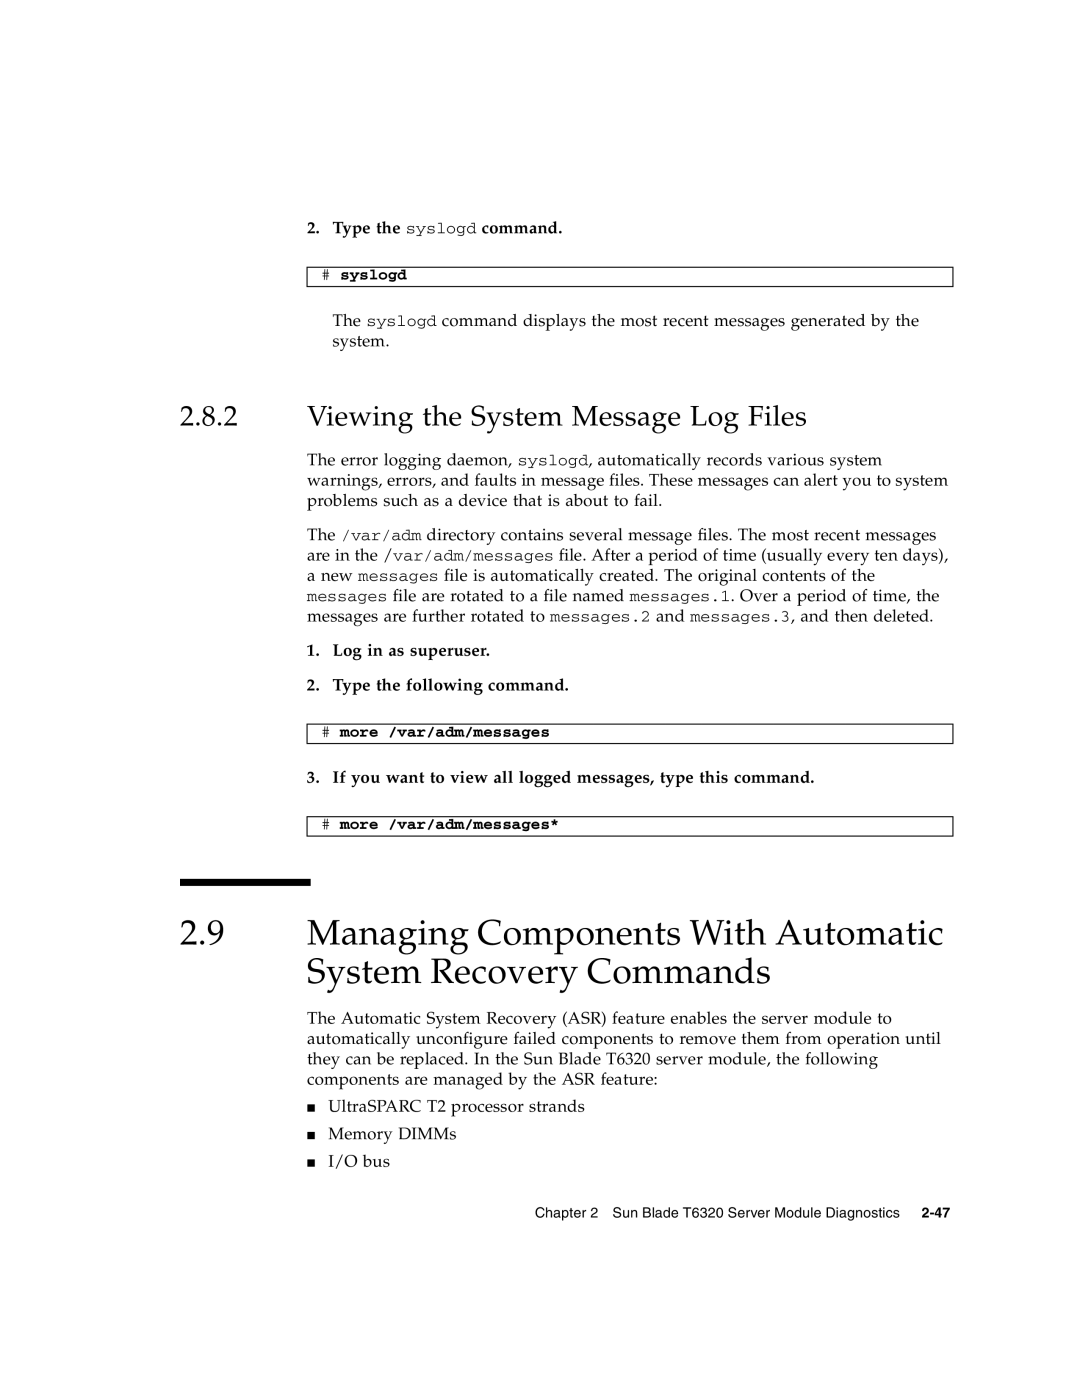 Sun Microsystems T6320 Managing Components With Automatic System Recovery Commands, Viewing the System Message Log Files 